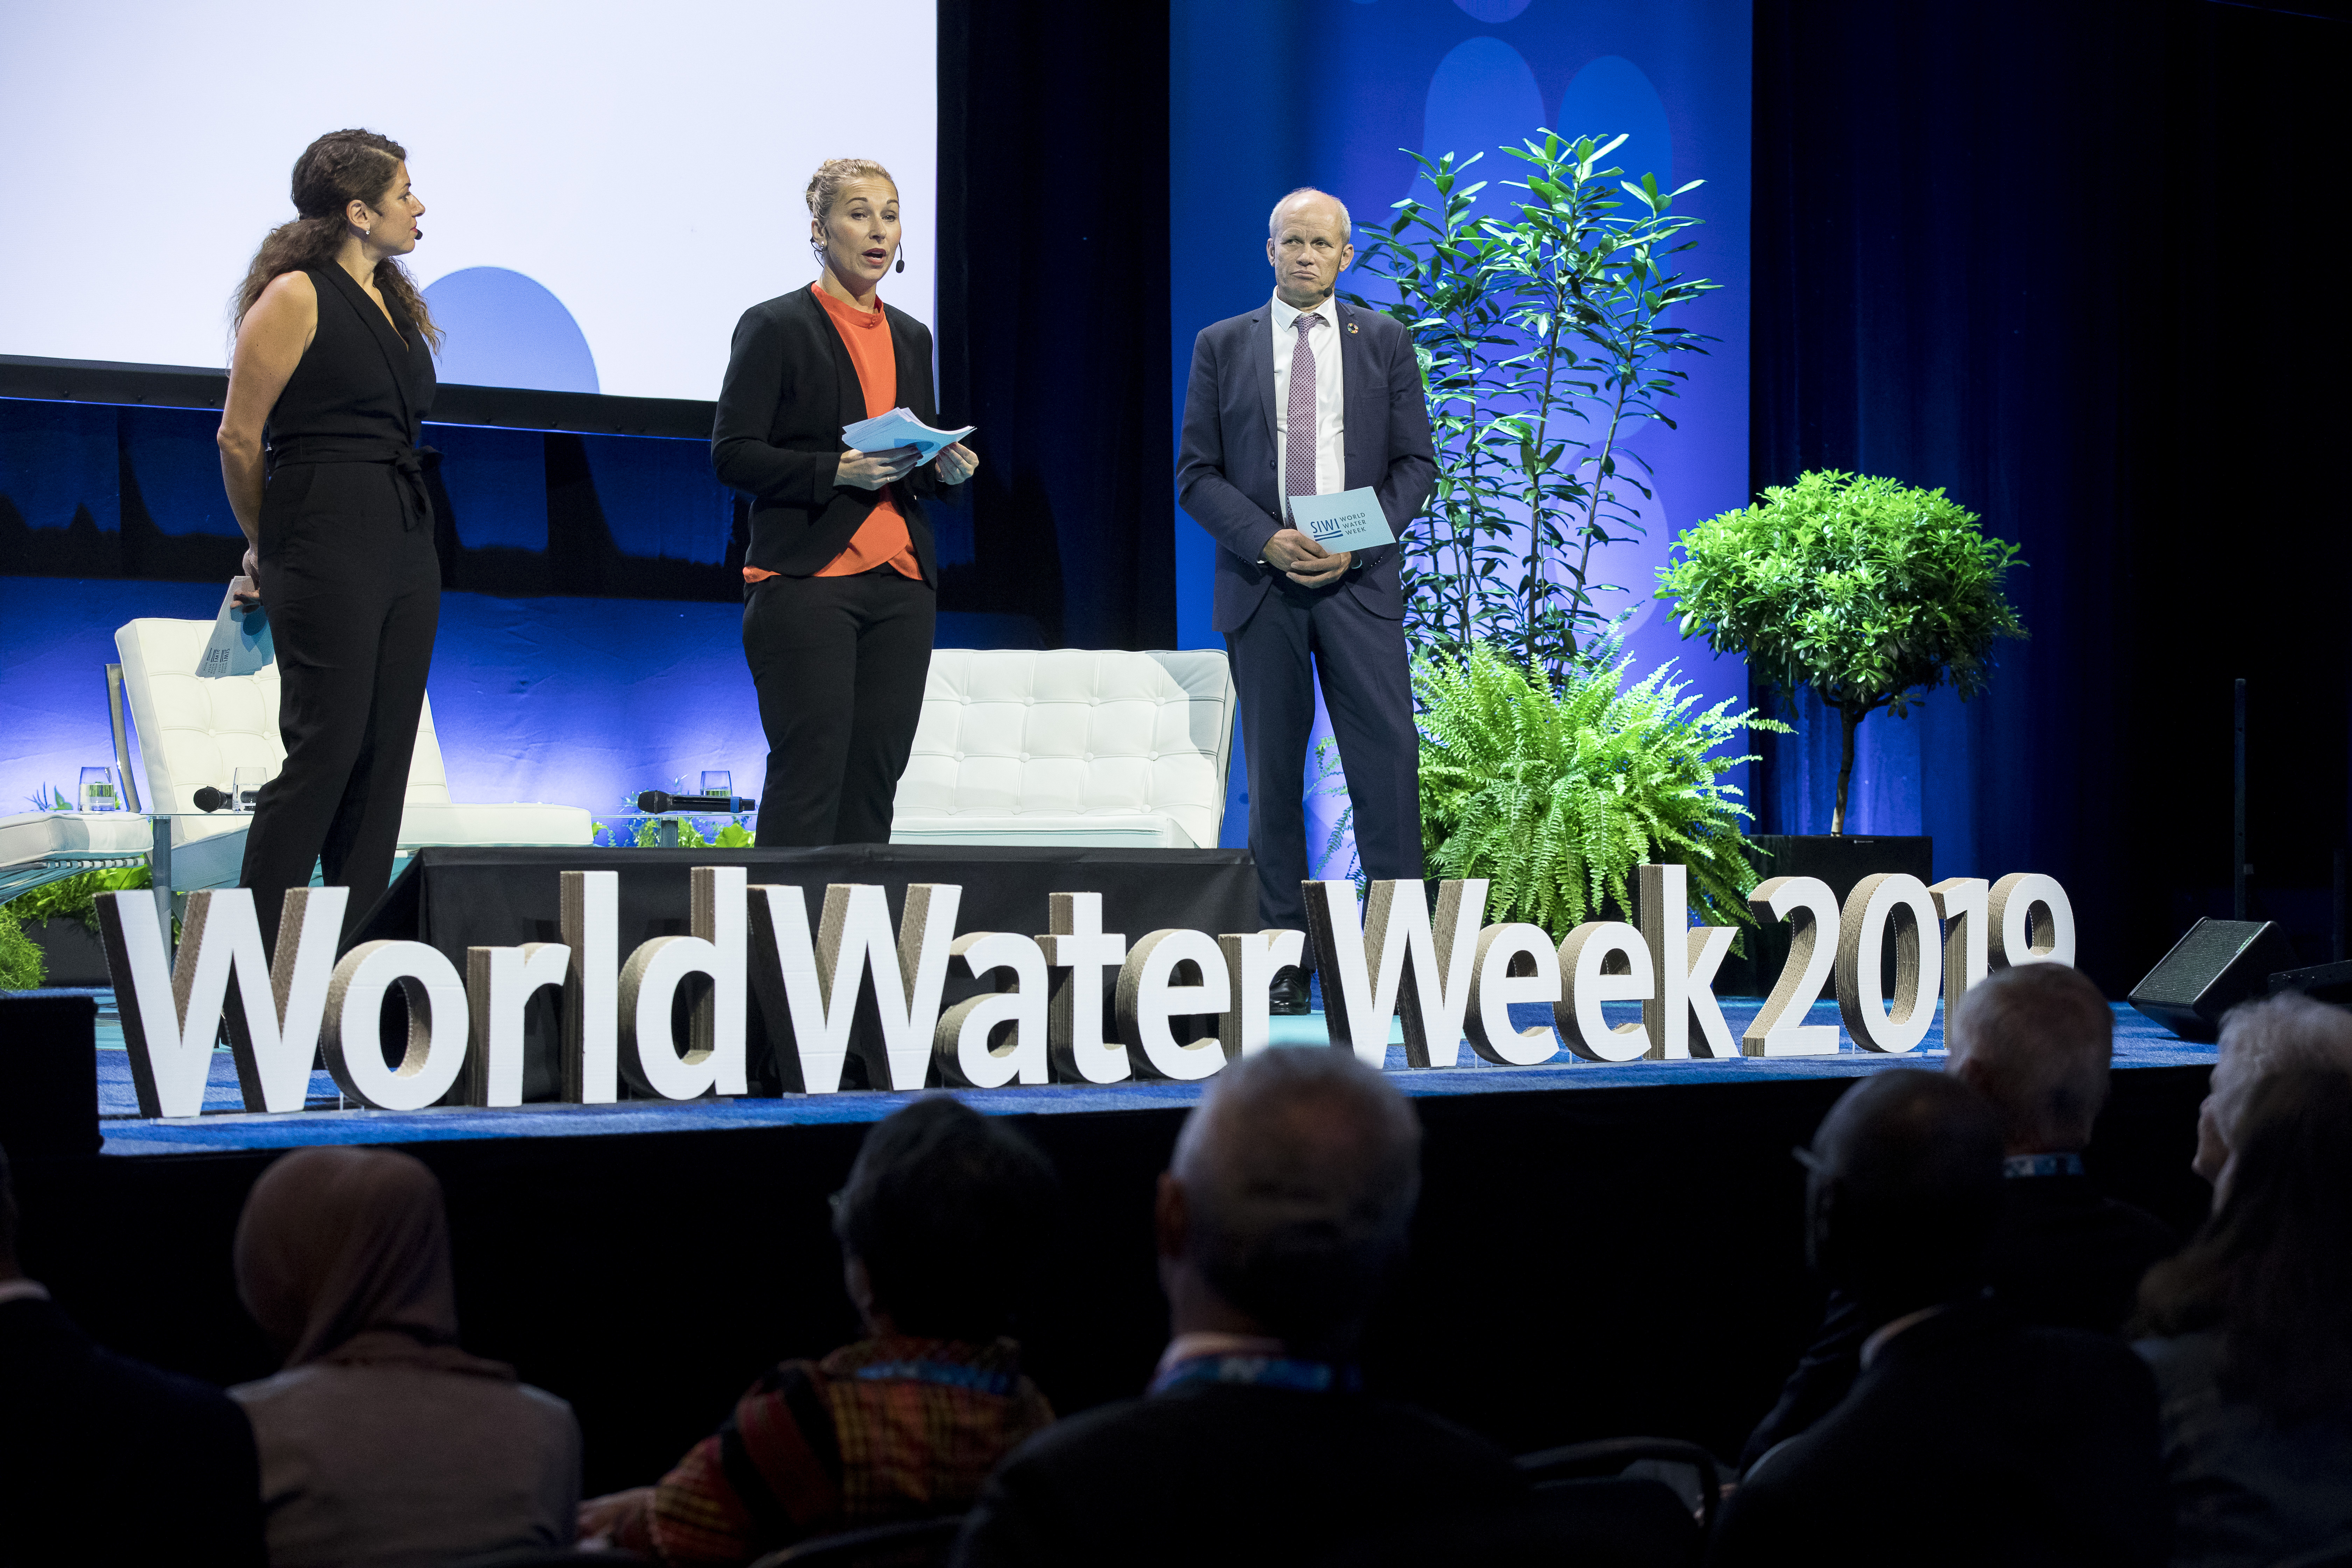 World Water Week opens with calls for action on water equality